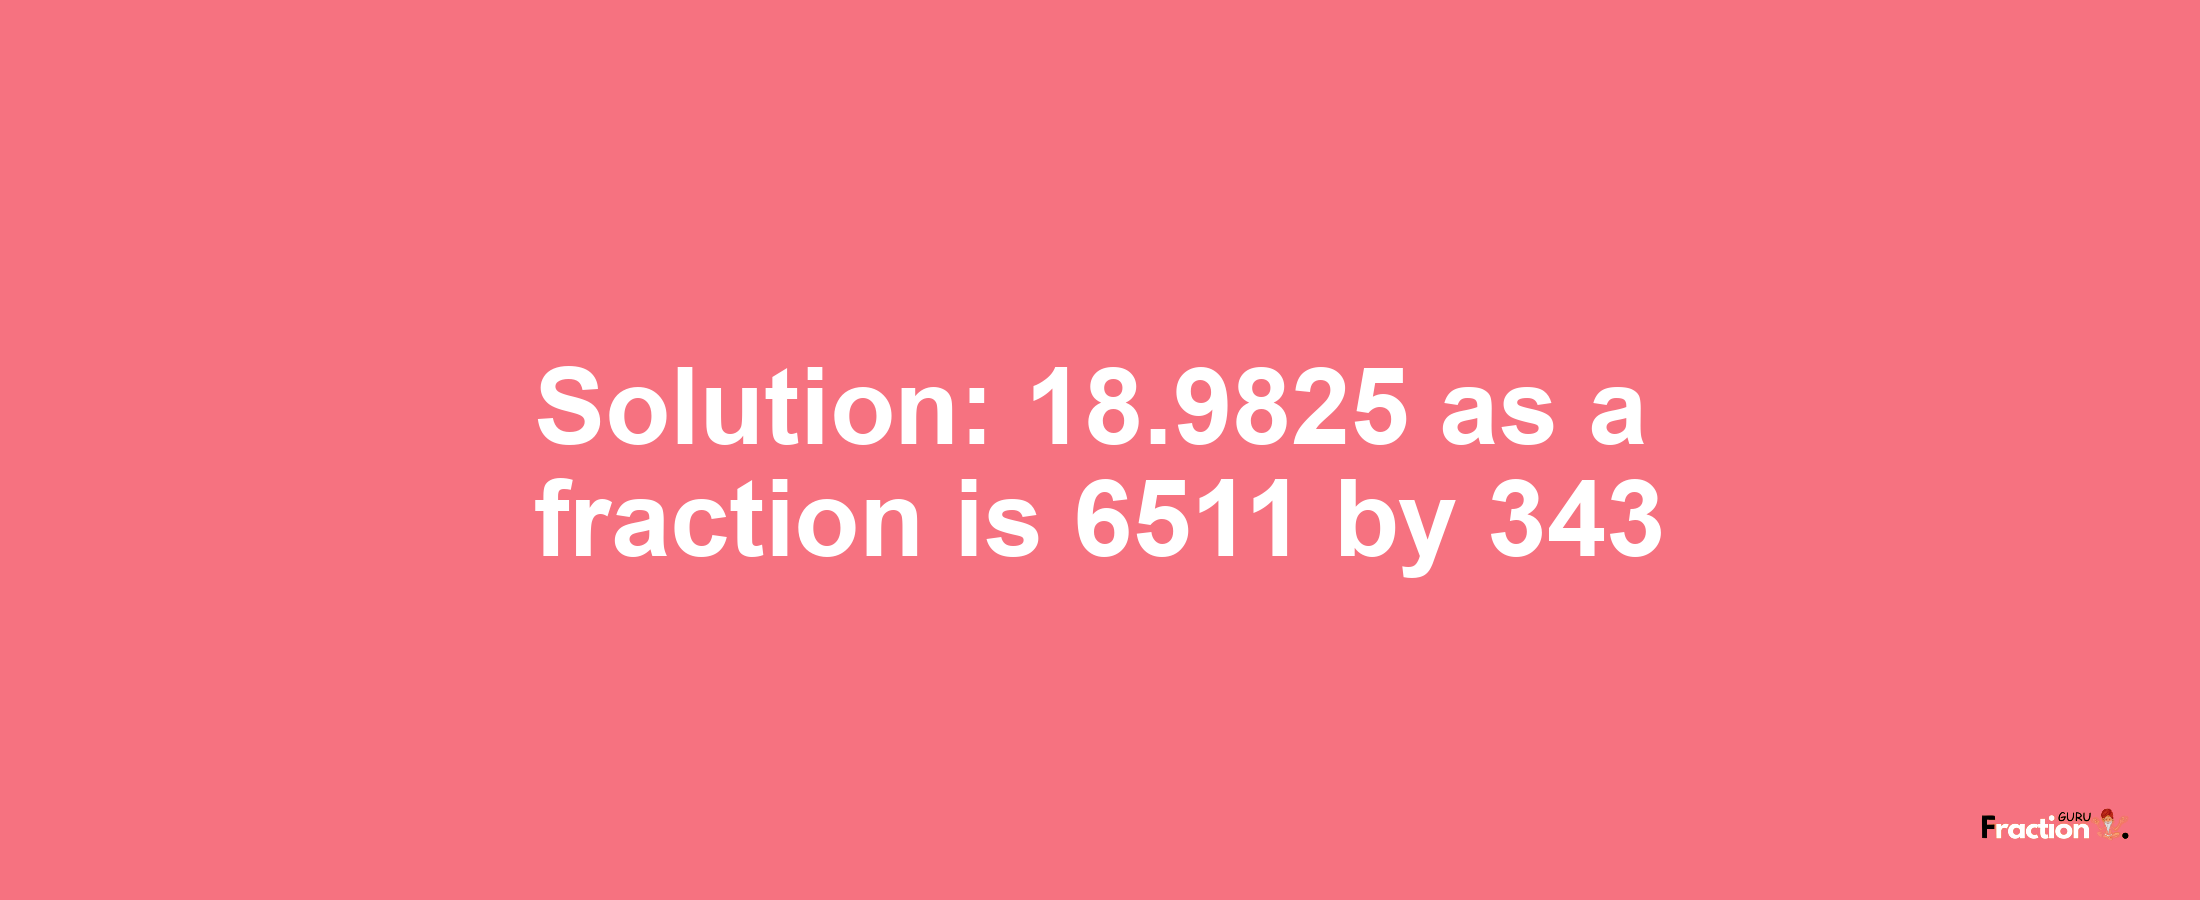 Solution:18.9825 as a fraction is 6511/343